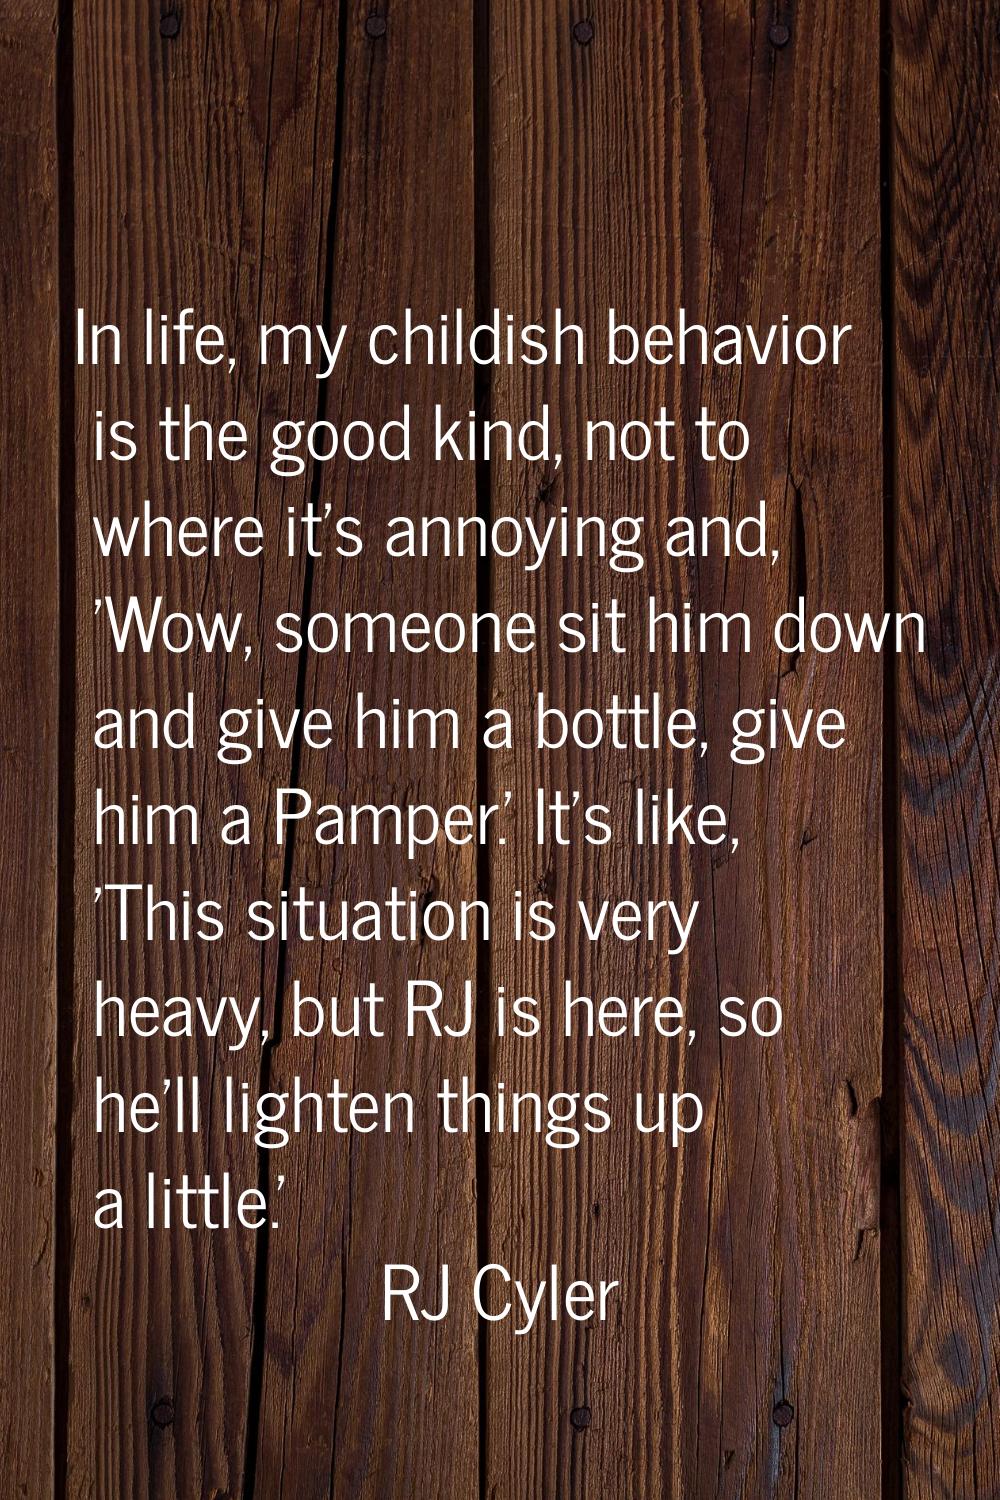 In life, my childish behavior is the good kind, not to where it's annoying and, 'Wow, someone sit h